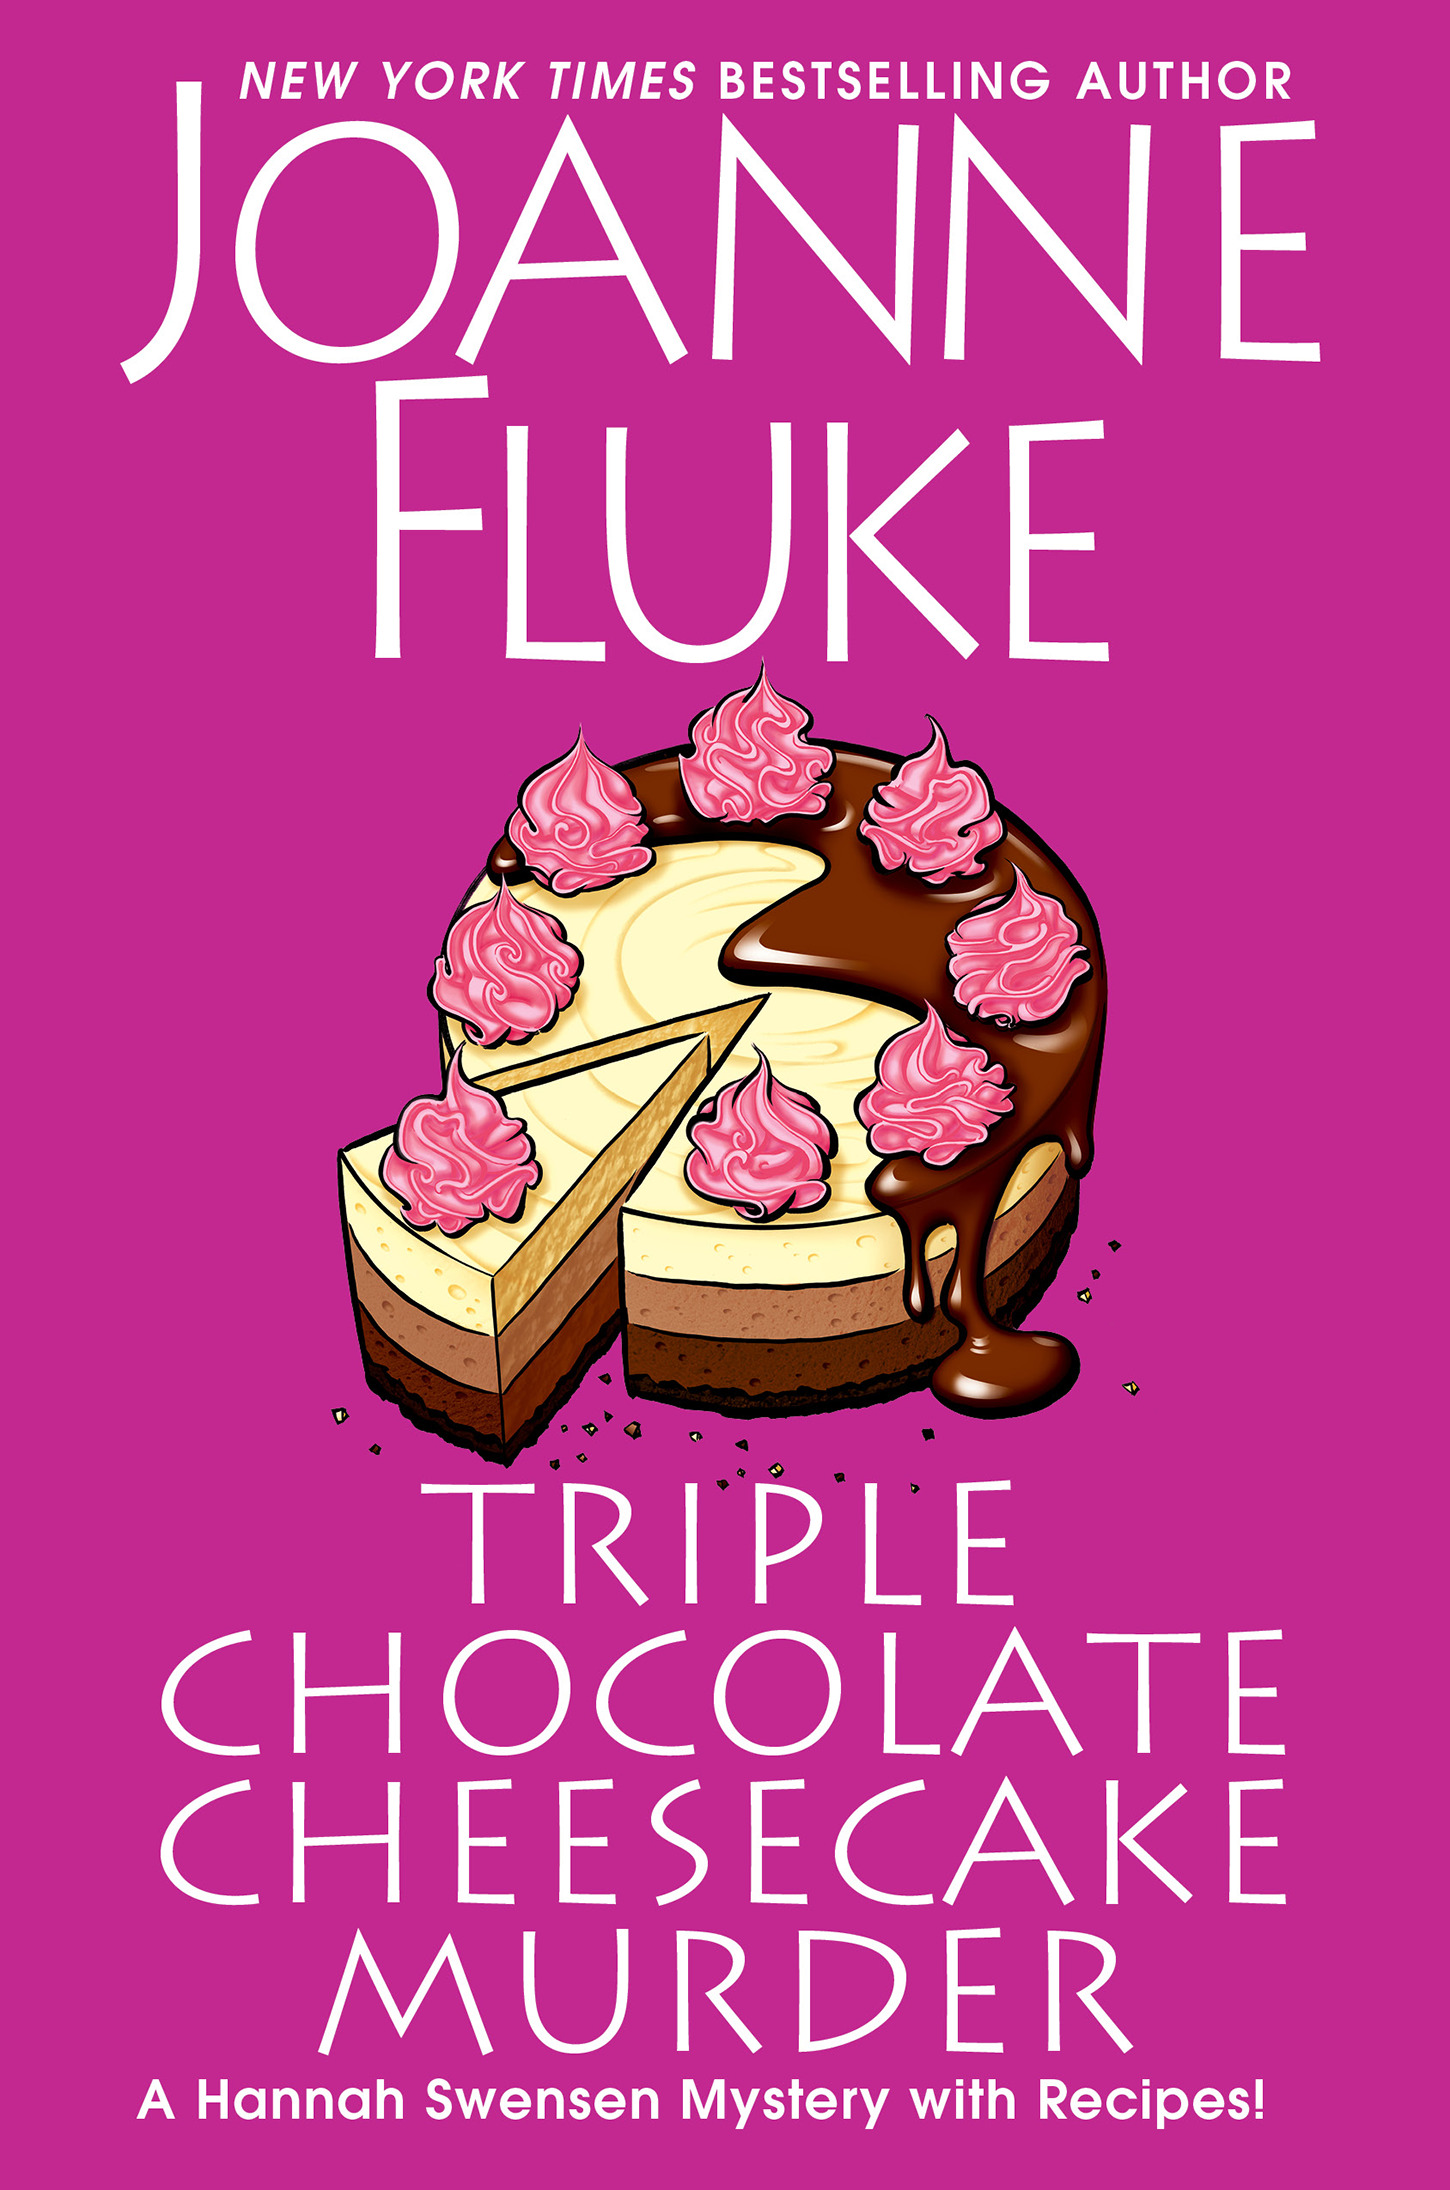 A Hannah Swensen Mystery - Triple Chocolate Cheesecake Murder : An Entertaining &amp; Delicious Cozy Mystery with Recipes | Fluke, Joanne